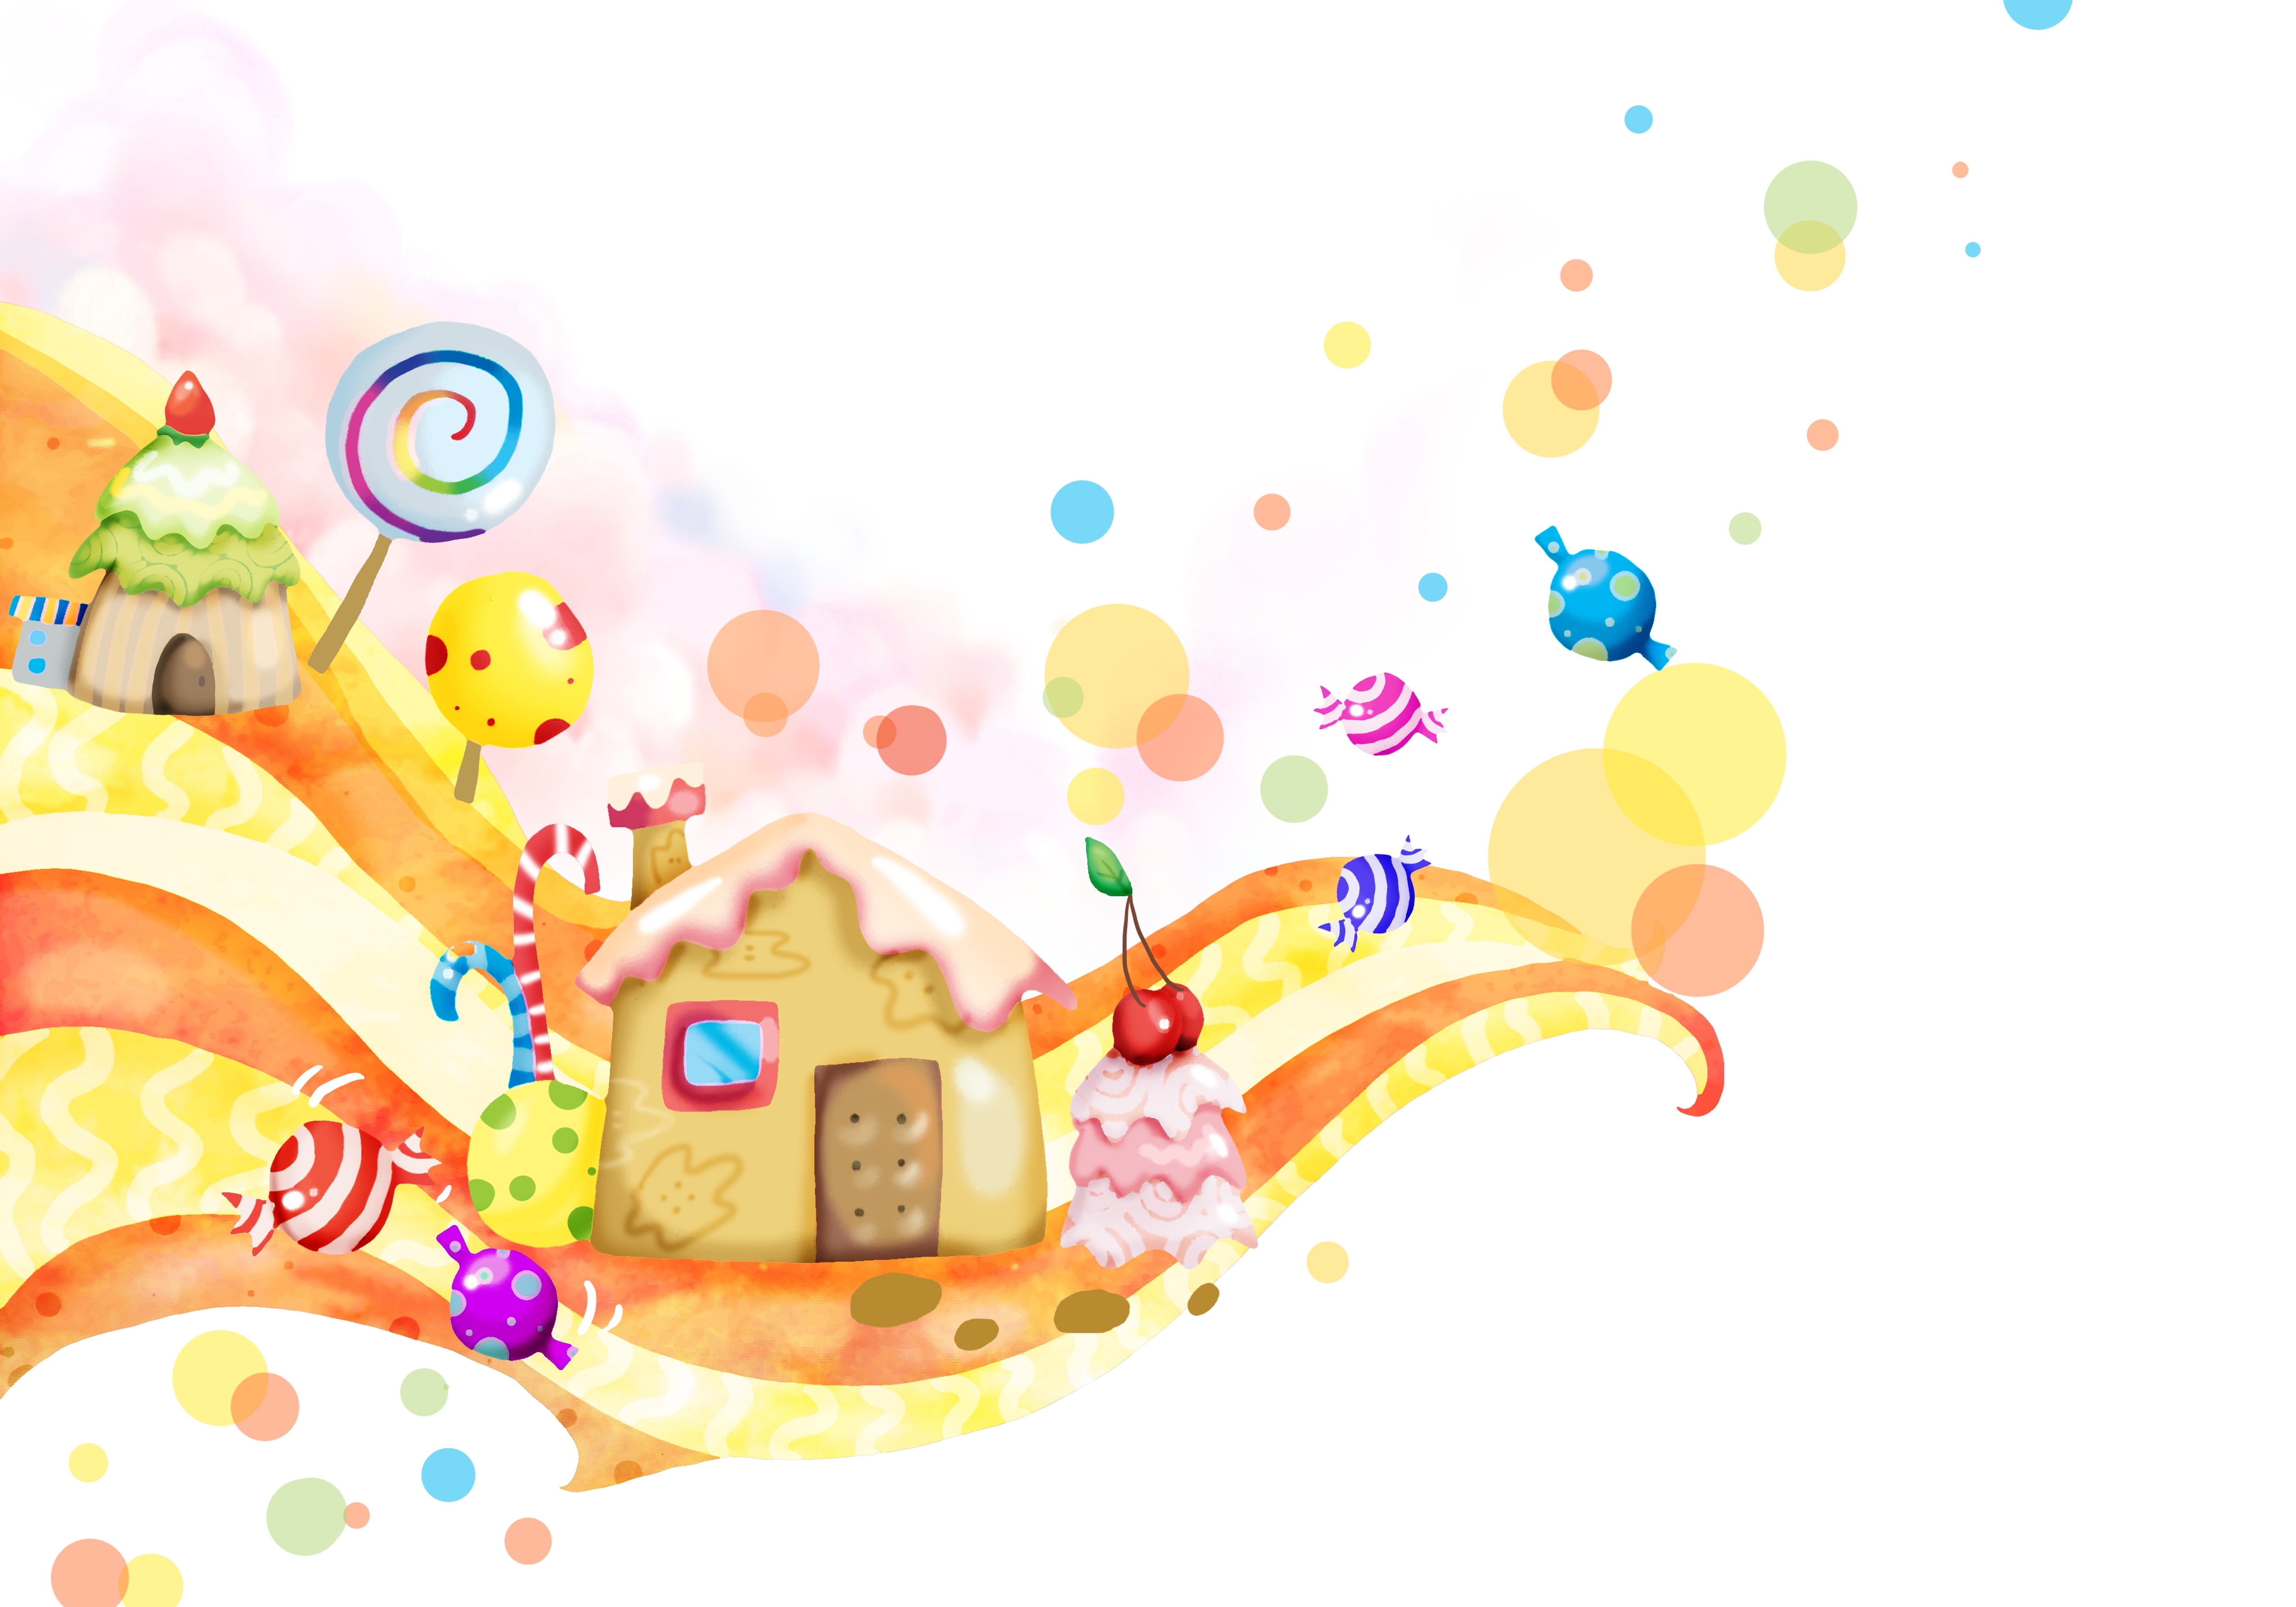 Download wallpaper fantasy, home, candy, sweet, lollipops, twirl, baby Wallpaper, cherry, section mood in resolution 5000x3500